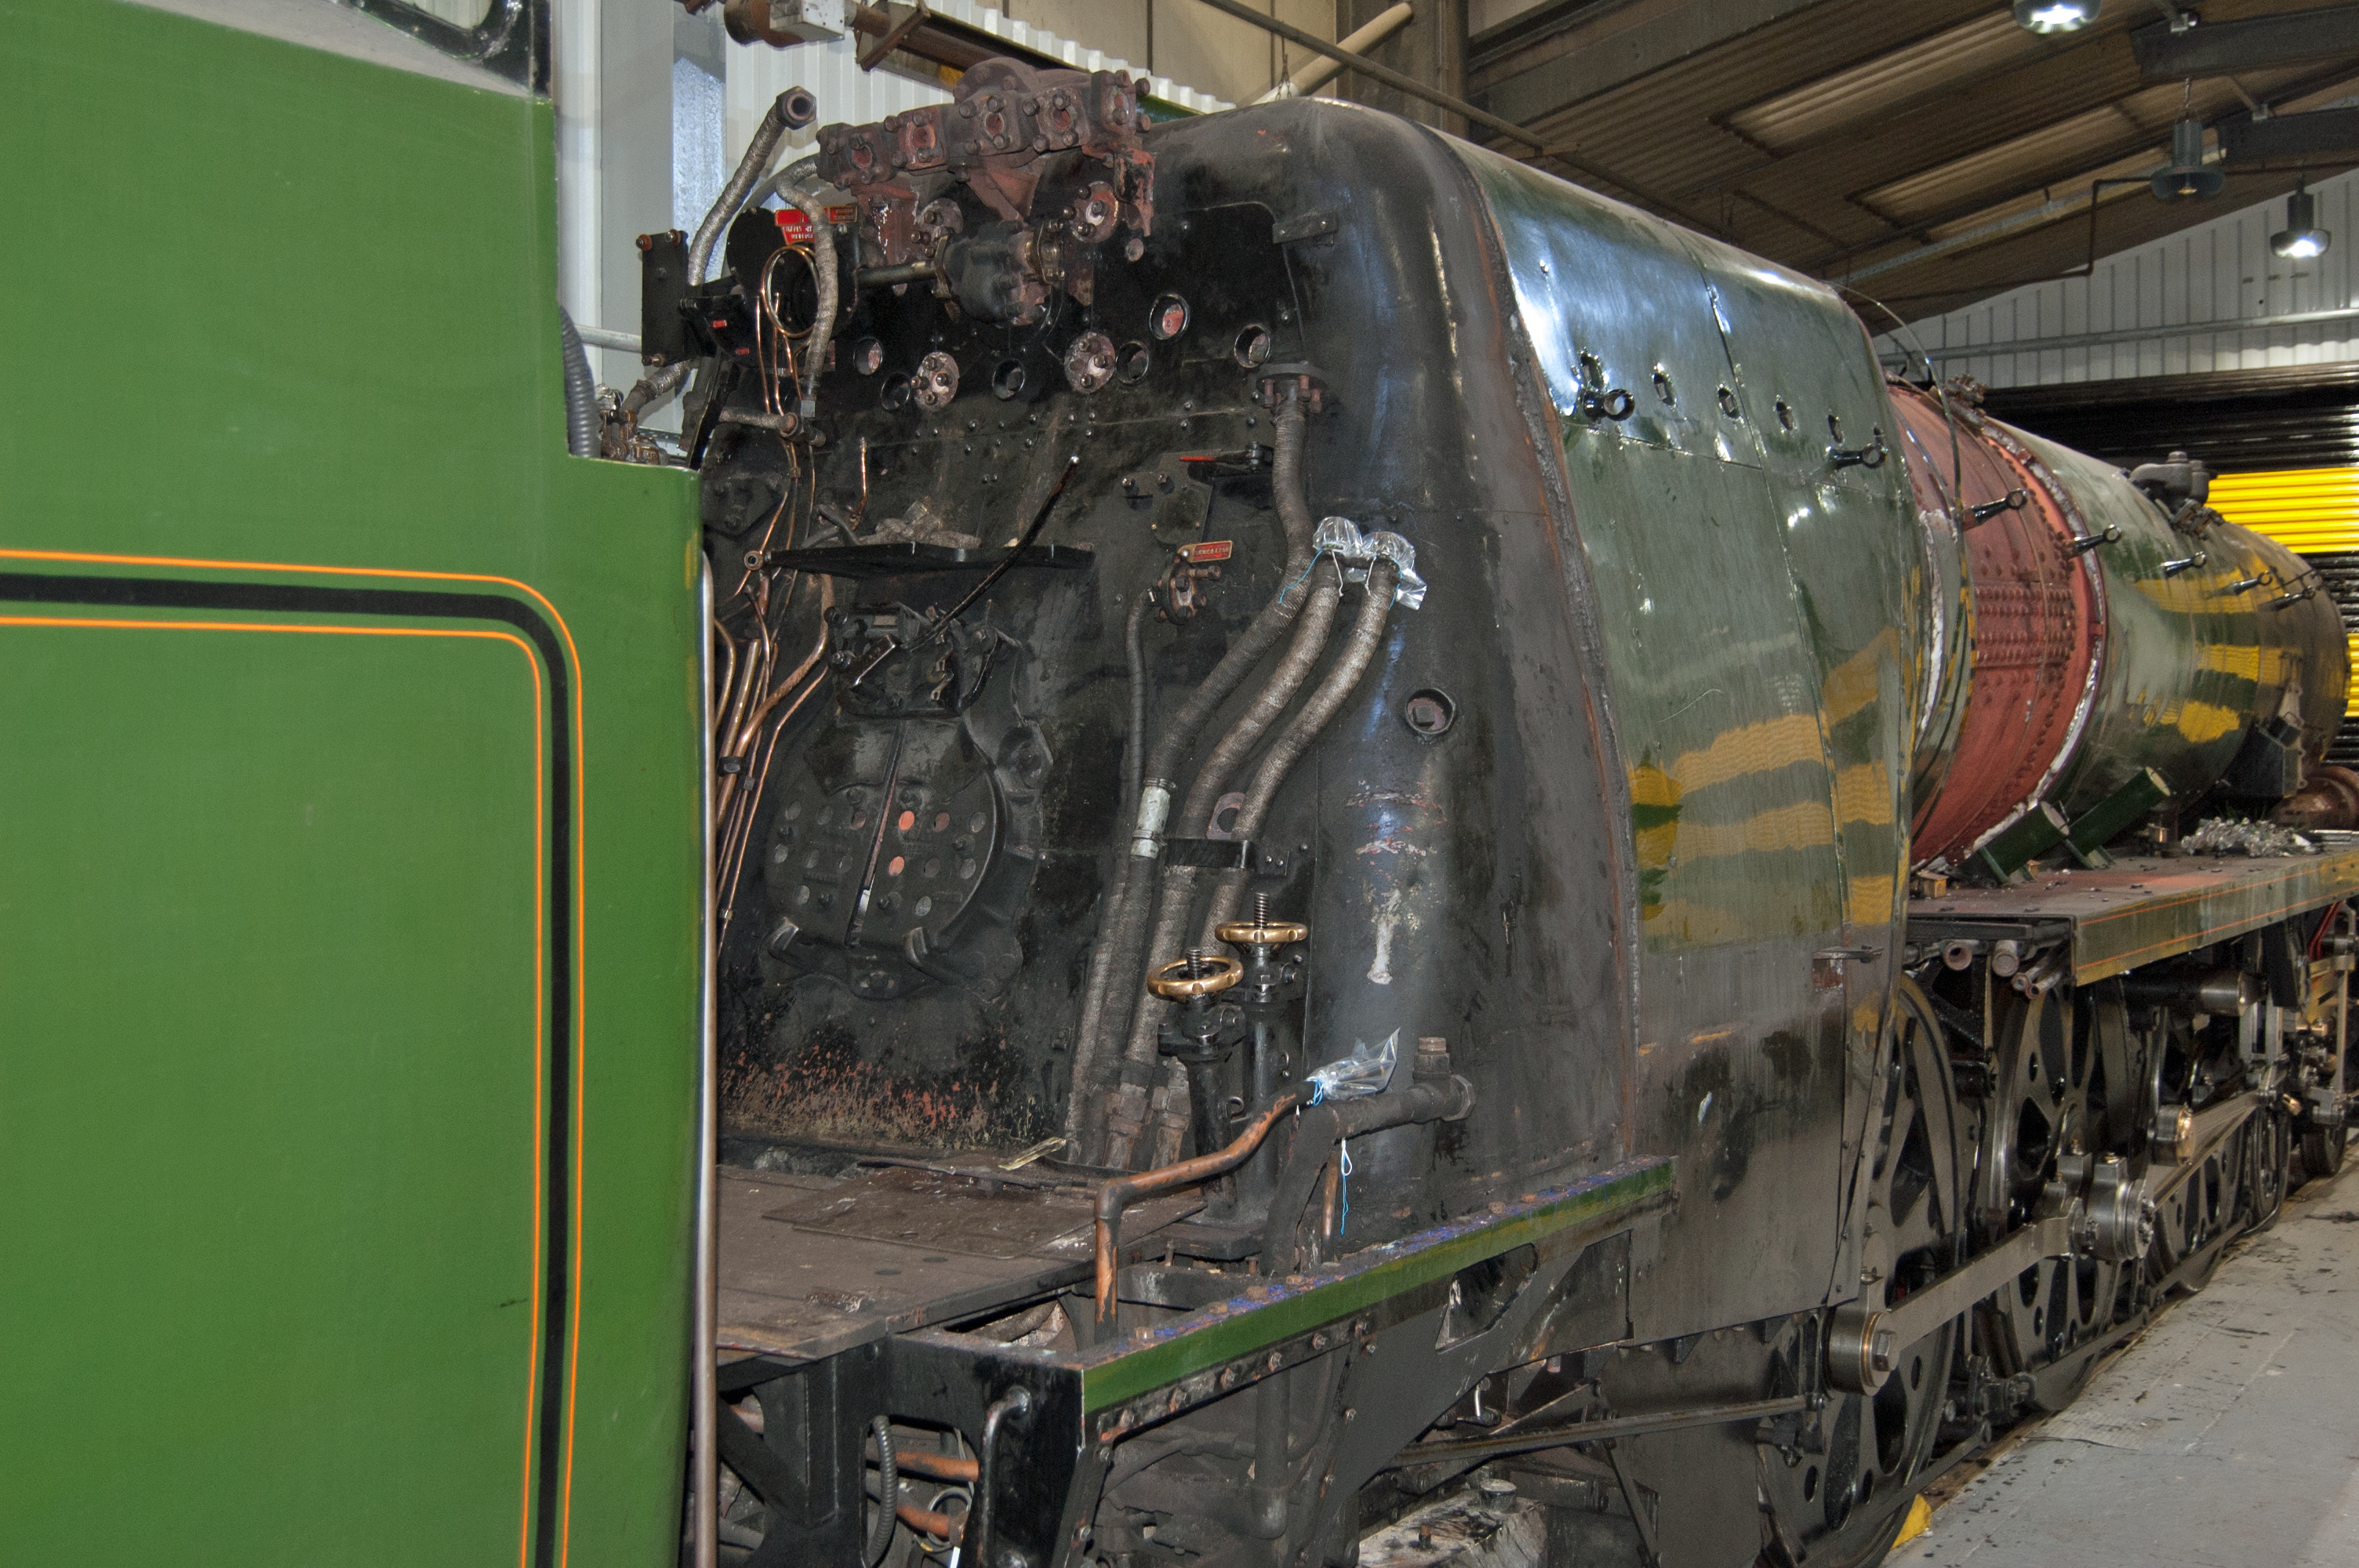 The cab and several of the fittings have been removed